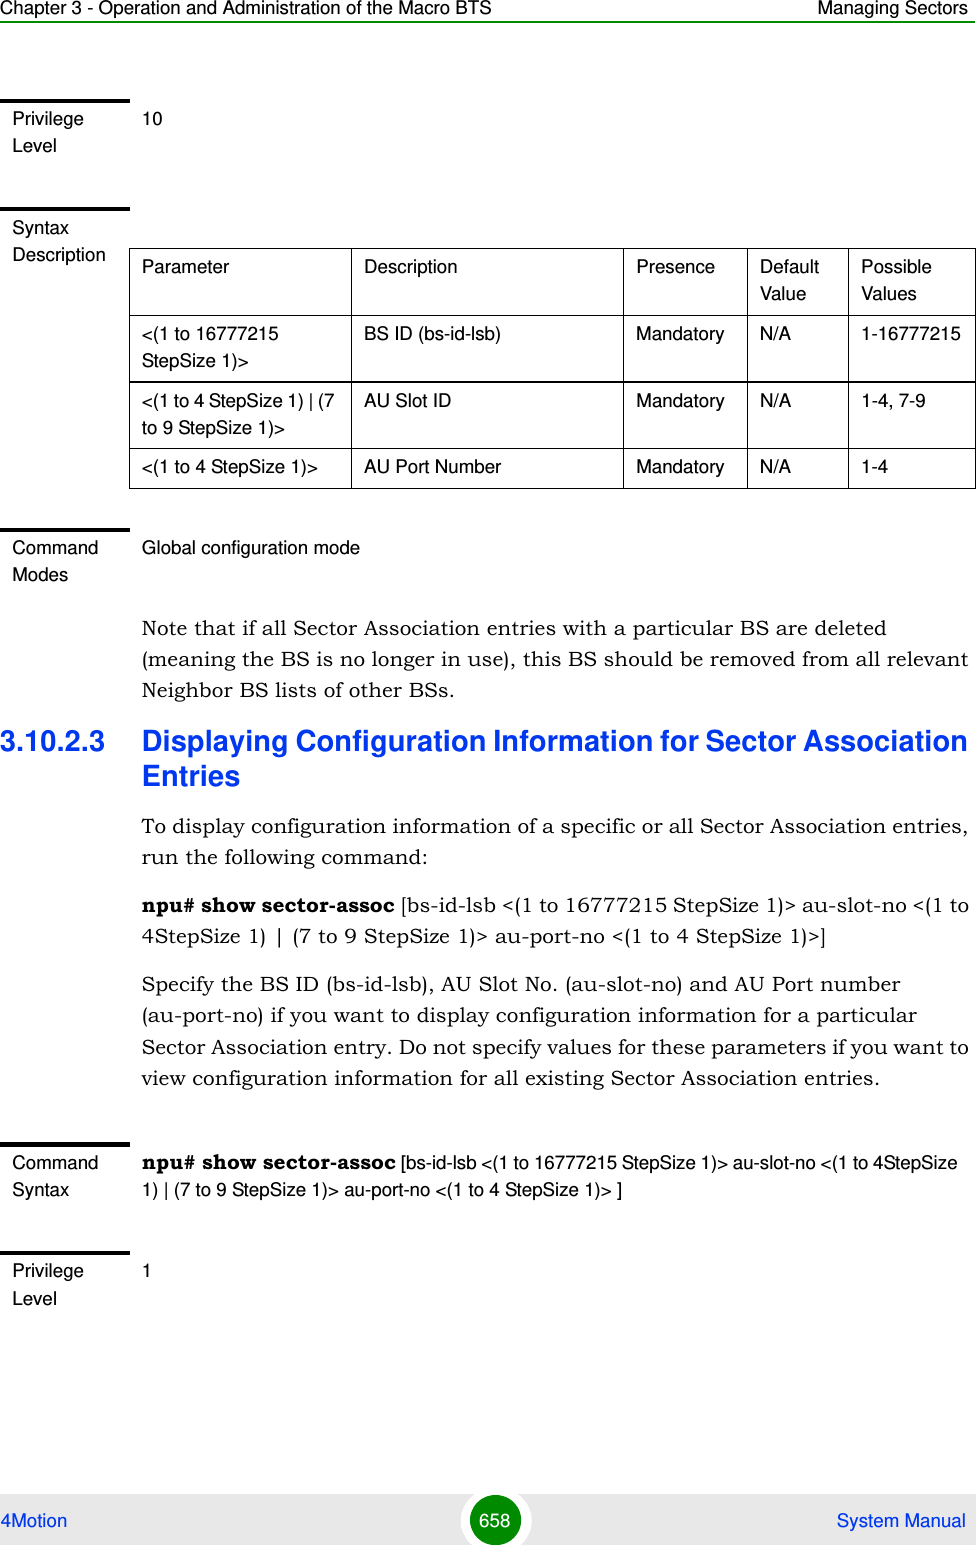 Chapter 3 - Operation and Administration of the Macro BTS Managing Sectors4Motion 658  System ManualNote that if all Sector Association entries with a particular BS are deleted (meaning the BS is no longer in use), this BS should be removed from all relevant Neighbor BS lists of other BSs.3.10.2.3 Displaying Configuration Information for Sector Association EntriesTo display configuration information of a specific or all Sector Association entries, run the following command:npu# show sector-assoc [bs-id-lsb &lt;(1 to 16777215 StepSize 1)&gt; au-slot-no &lt;(1 to 4StepSize 1) | (7 to 9 StepSize 1)&gt; au-port-no &lt;(1 to 4 StepSize 1)&gt;]Specify the BS ID (bs-id-lsb), AU Slot No. (au-slot-no) and AU Port number (au-port-no) if you want to display configuration information for a particular Sector Association entry. Do not specify values for these parameters if you want to view configuration information for all existing Sector Association entries.Privilege Level10Syntax Description Parameter Description Presence Default ValuePossible Values&lt;(1 to 16777215 StepSize 1)&gt;BS ID (bs-id-lsb) Mandatory N/A 1-16777215&lt;(1 to 4 StepSize 1) | (7 to 9 StepSize 1)&gt;AU Slot ID Mandatory N/A 1-4, 7-9&lt;(1 to 4 StepSize 1)&gt; AU Port Number Mandatory N/A 1-4Command ModesGlobal configuration modeCommand Syntaxnpu# show sector-assoc [bs-id-lsb &lt;(1 to 16777215 StepSize 1)&gt; au-slot-no &lt;(1 to 4StepSize 1) | (7 to 9 StepSize 1)&gt; au-port-no &lt;(1 to 4 StepSize 1)&gt; ]Privilege Level1